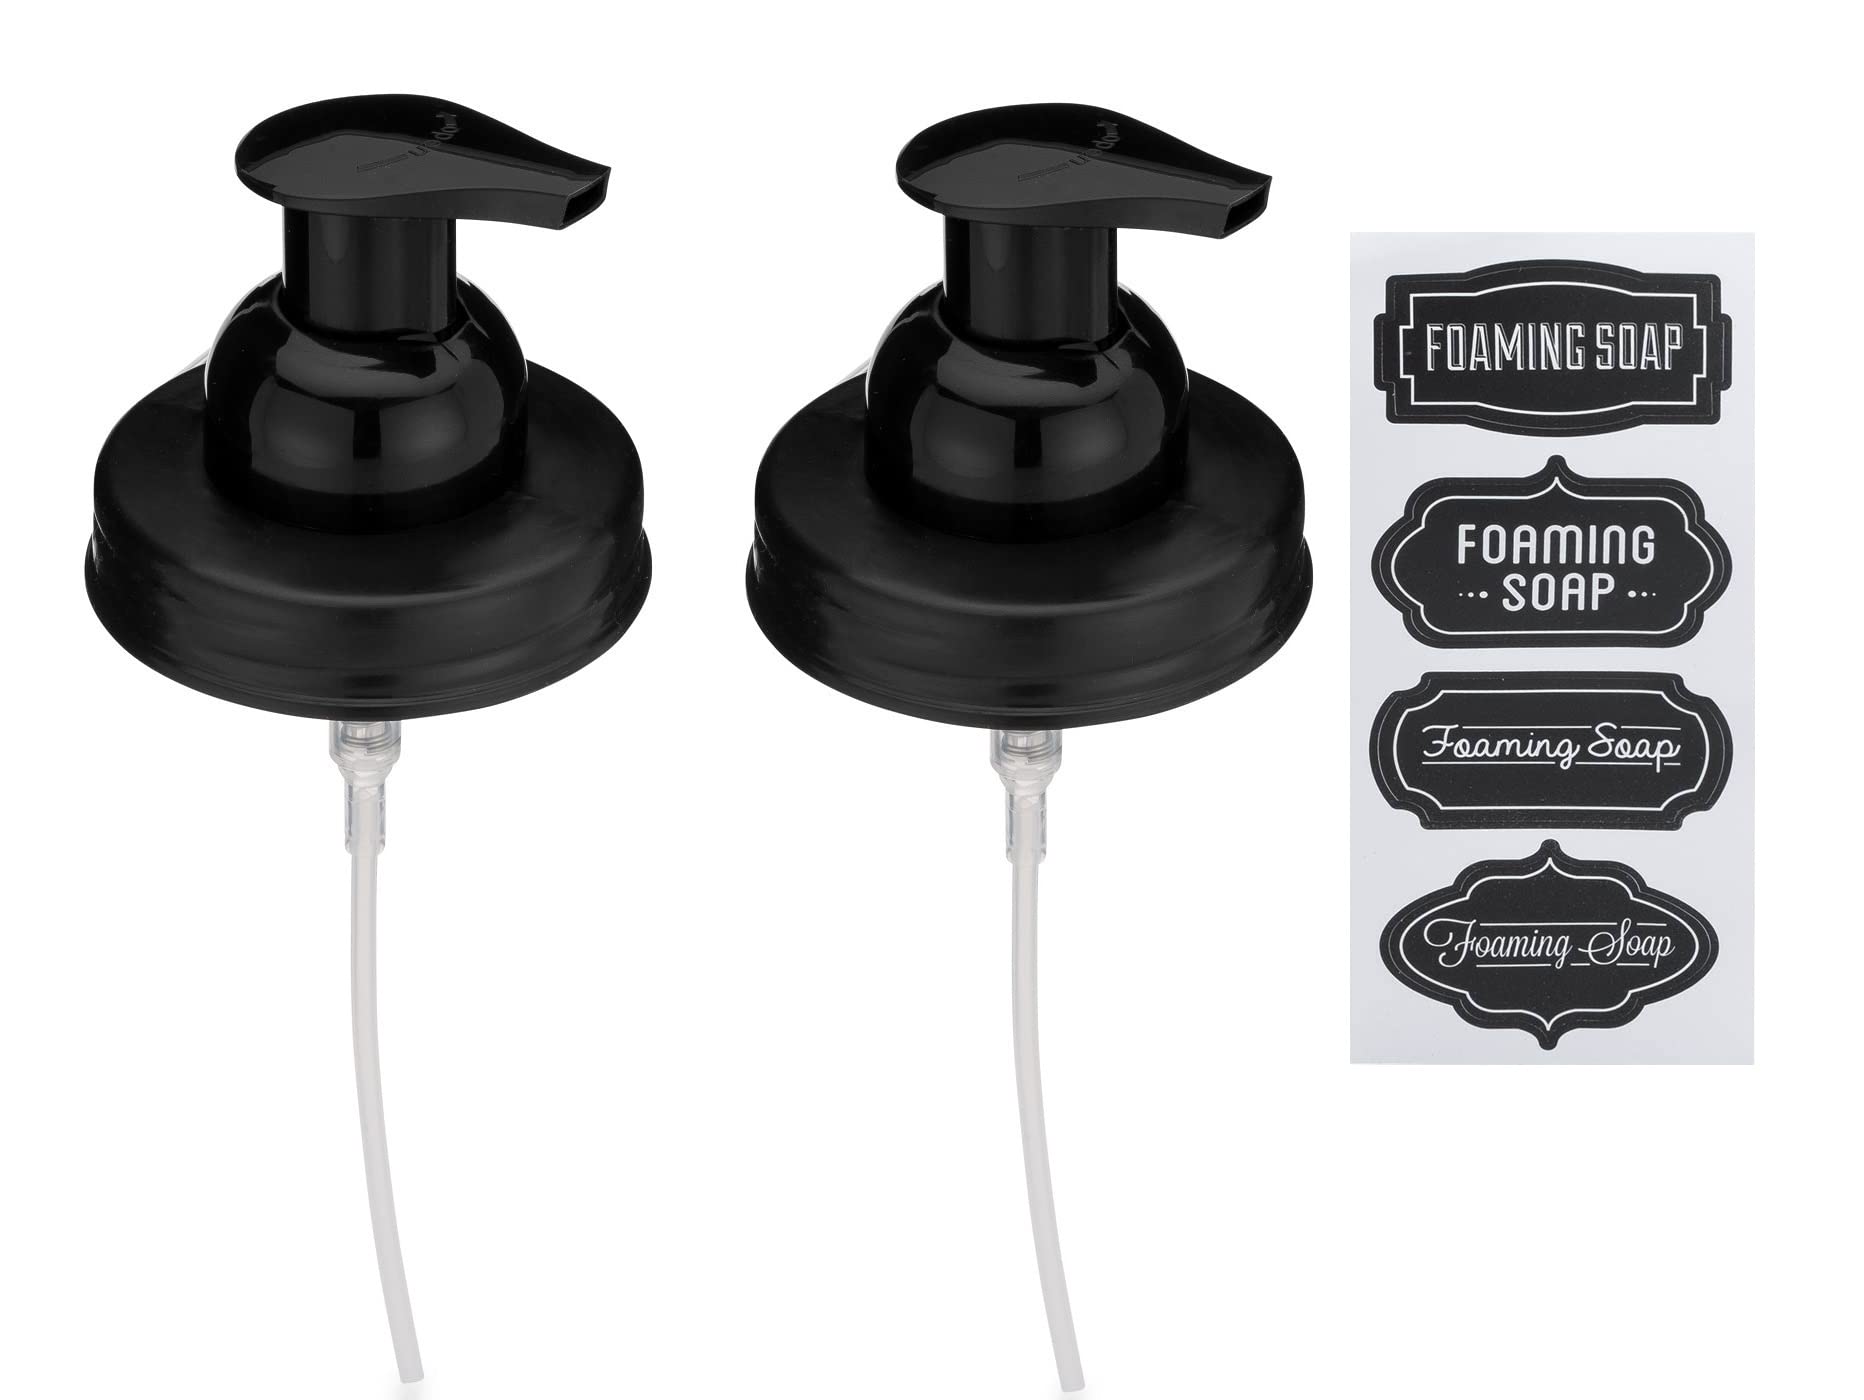 Book Cover Jarmazing Products Mason Jar Foaming Soap Dispenser Lids - Includes Waterproof Stickers! Black - 2 Pack